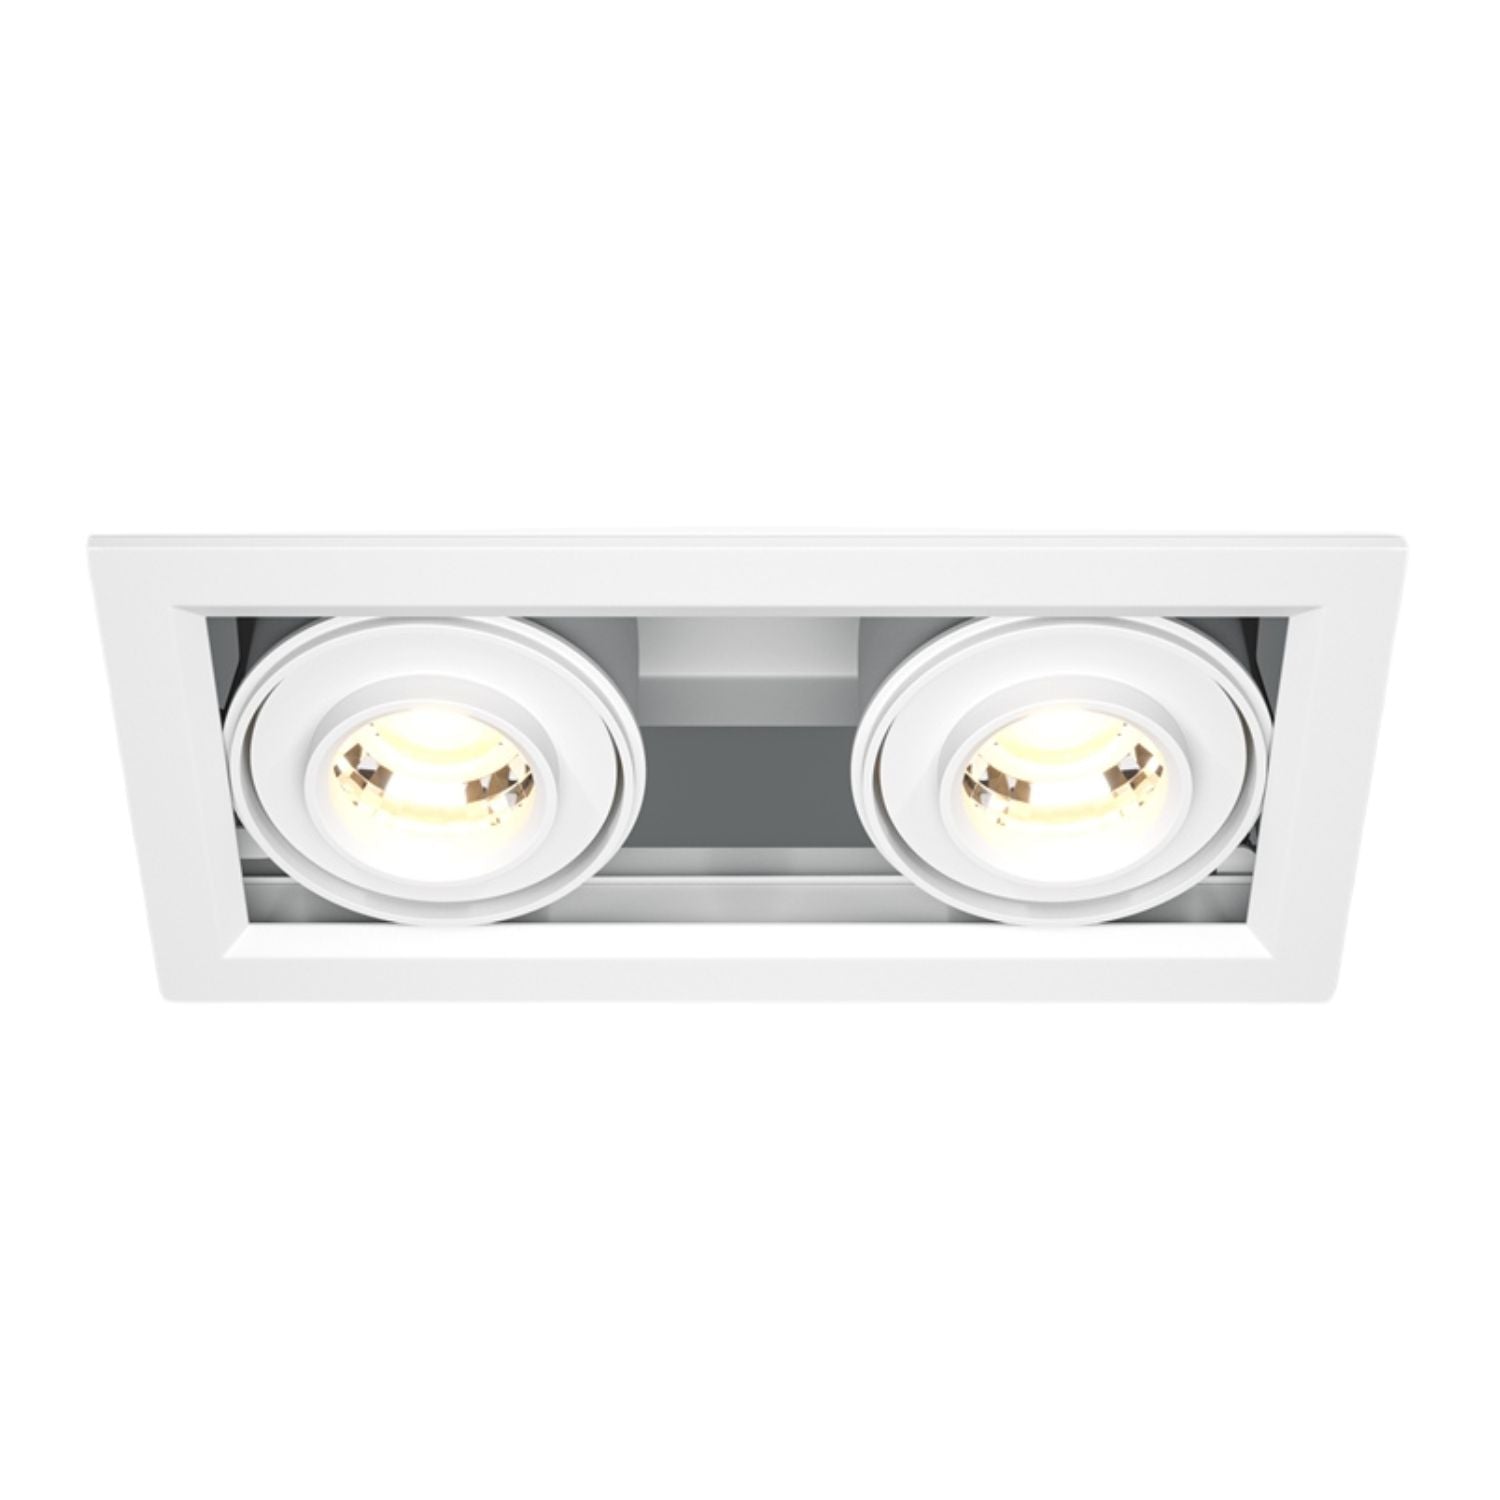 METAL MODERN - Double integrated LED recessed spotlight in aluminum